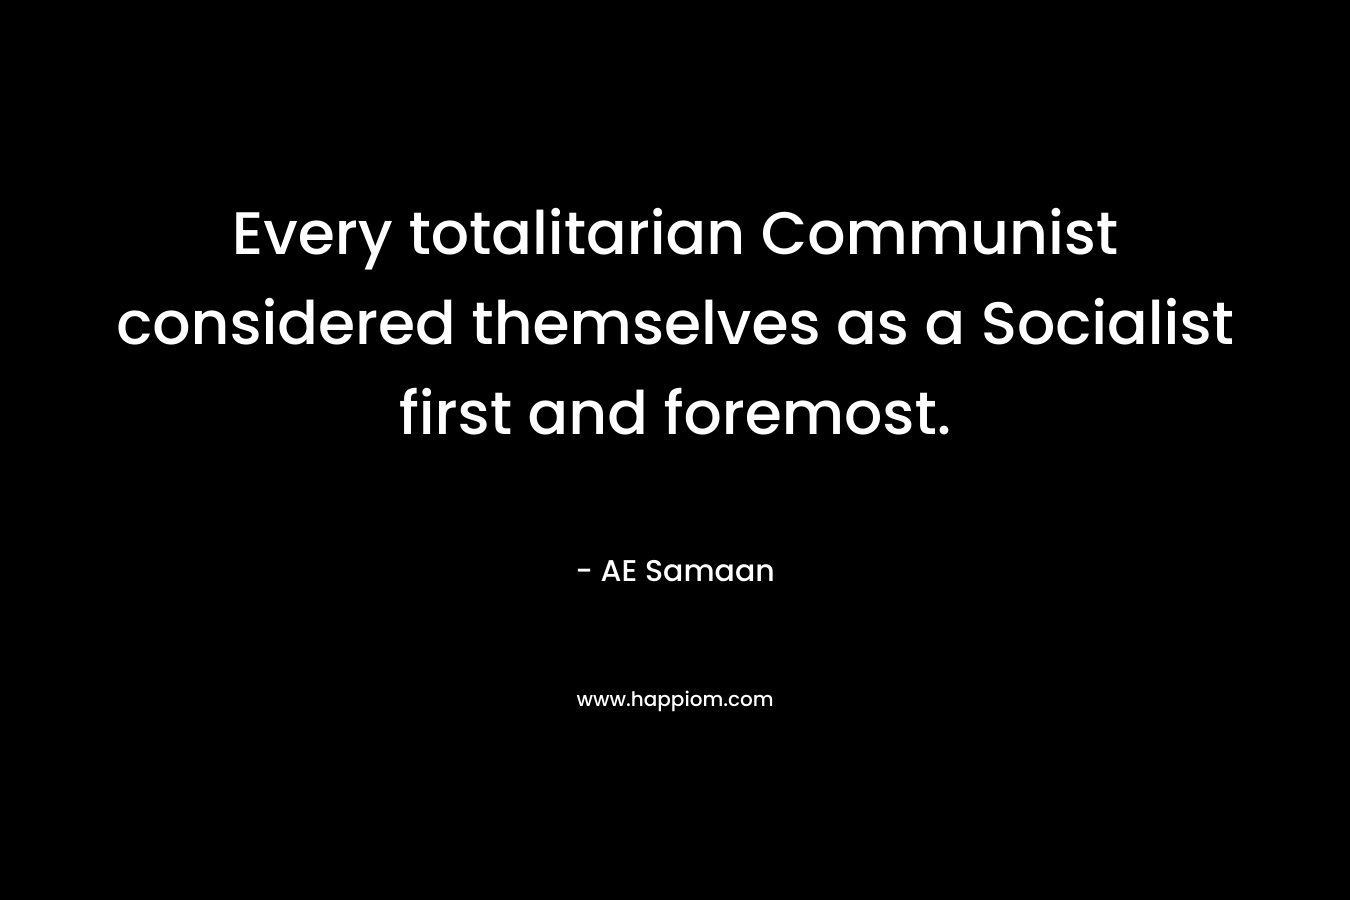 Every totalitarian Communist considered themselves as a Socialist first and foremost.